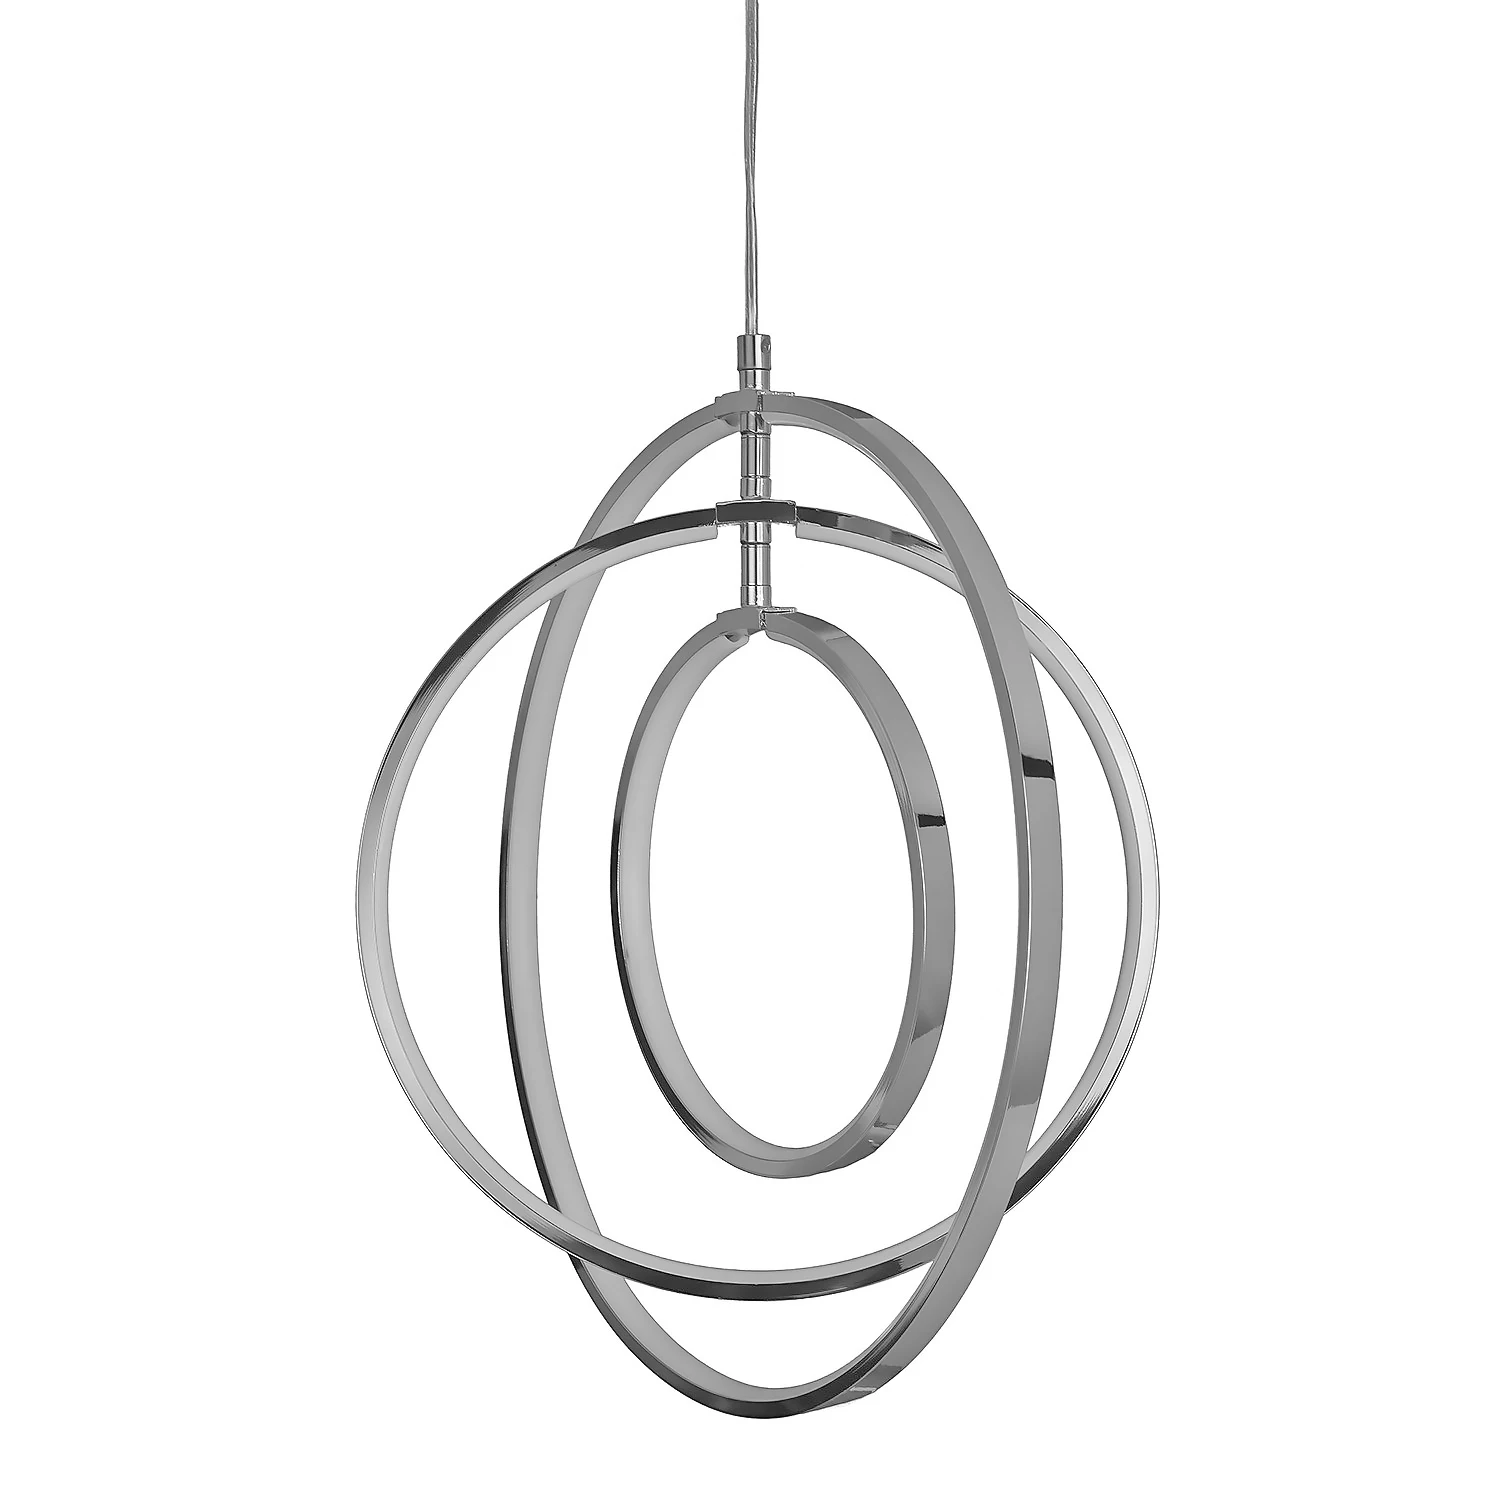 Modern 3 Ring Lighting LED Ceiling Chandeliers Contemporary Pendant Lights Living Room Cool White Light Fixtures Hanging Lamp